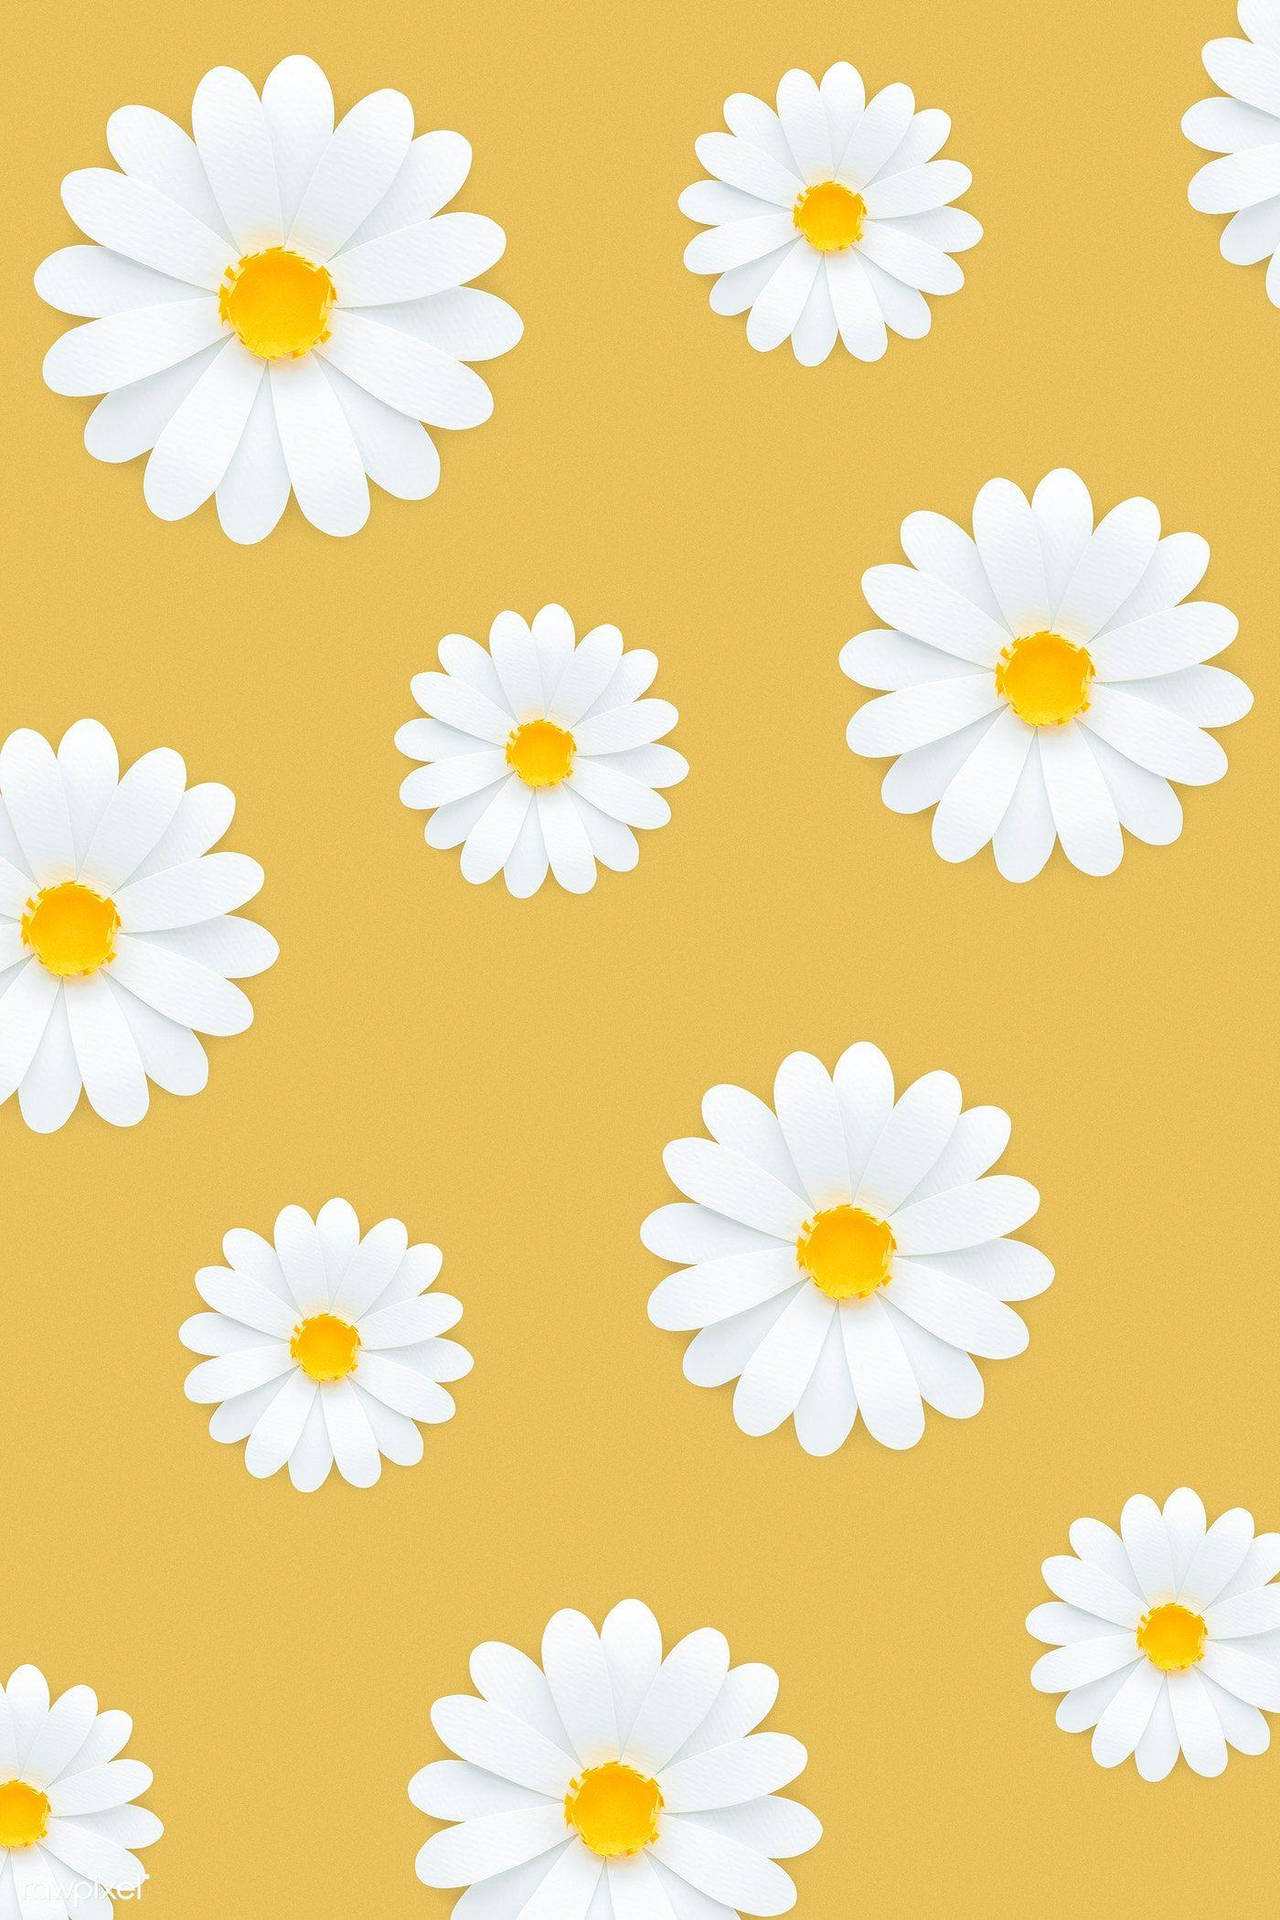 White Daisy Aesthetic In Yellow Background